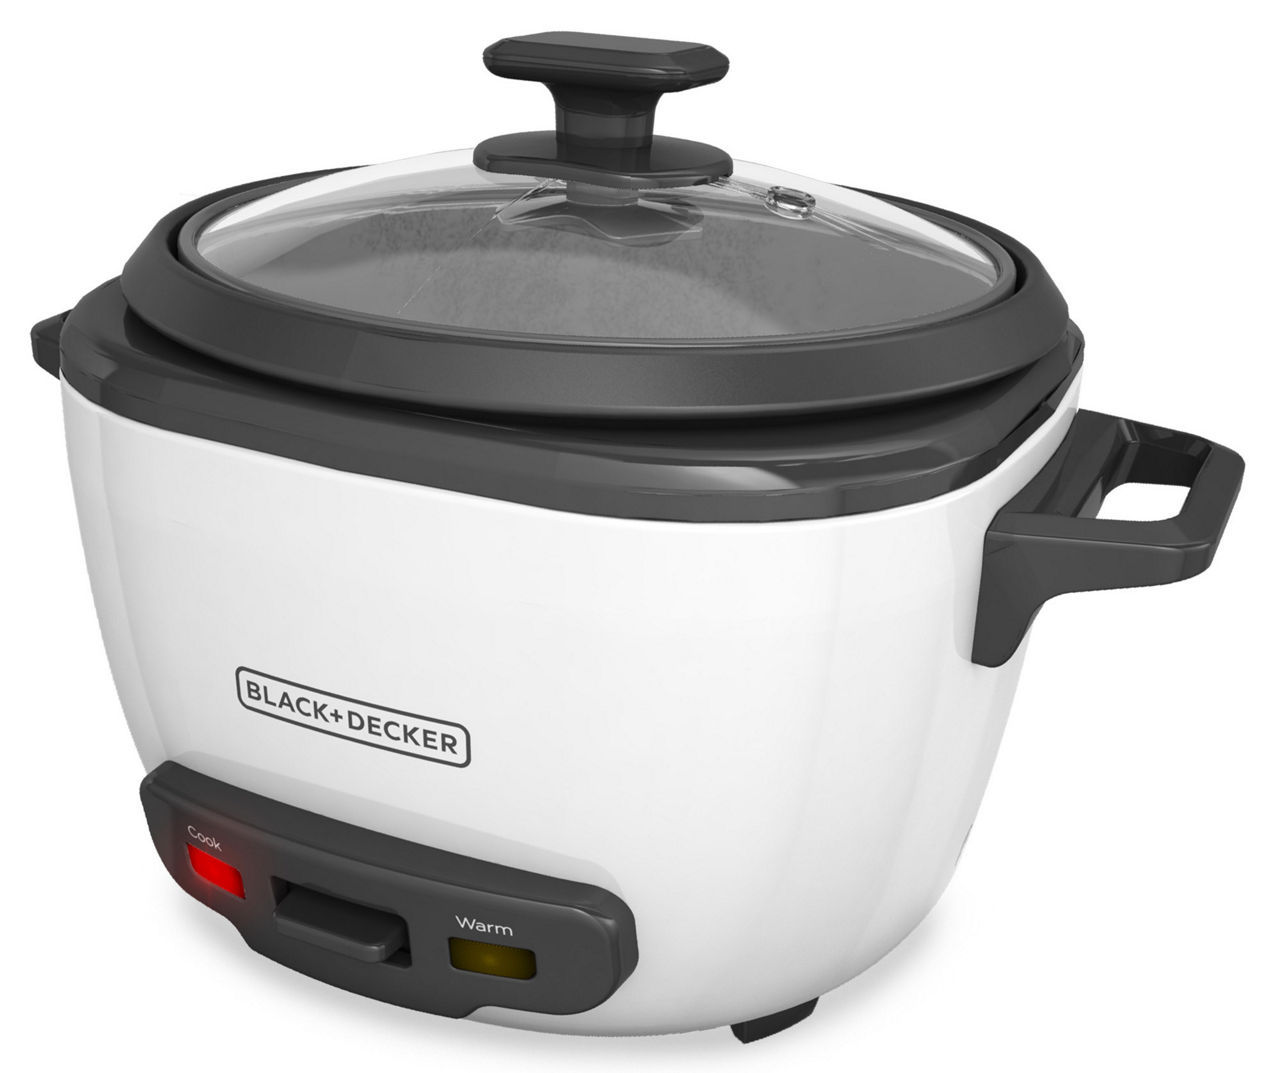 BLACK+DECKER 14-Cup Rice Cooker and Steamer Basket, RC514 